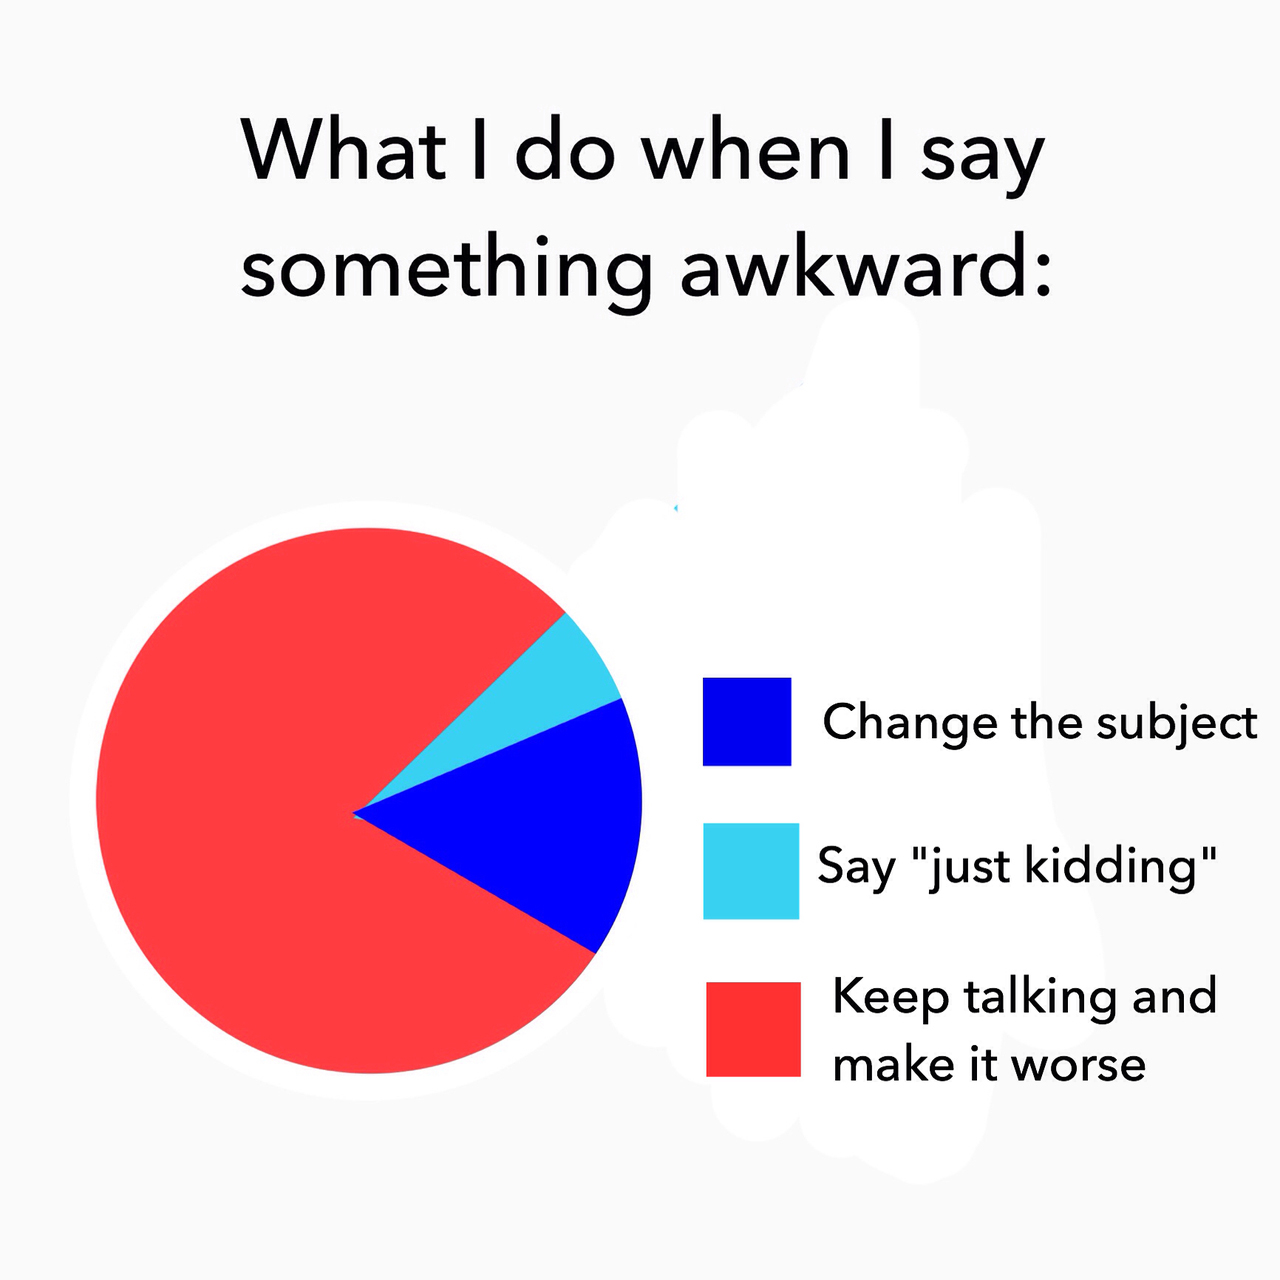 do when i say something awkward pie chart - What I do when I say something awkward Change the subject Say "just kidding" Keep talking and make it worse